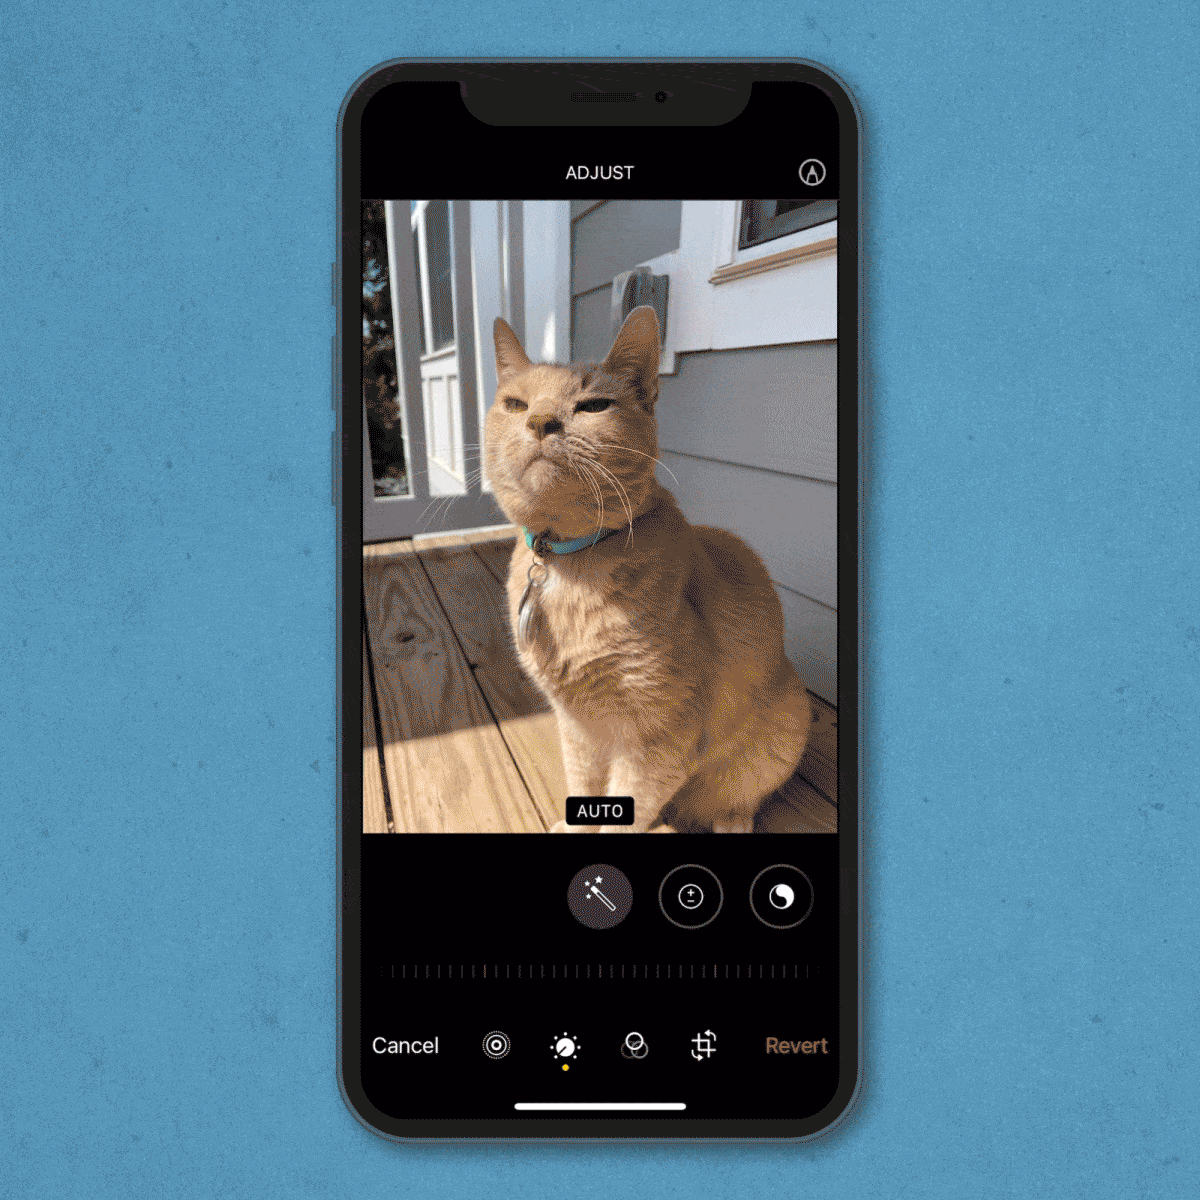 gif showing how to choose a frame from a live photo on an iPhone